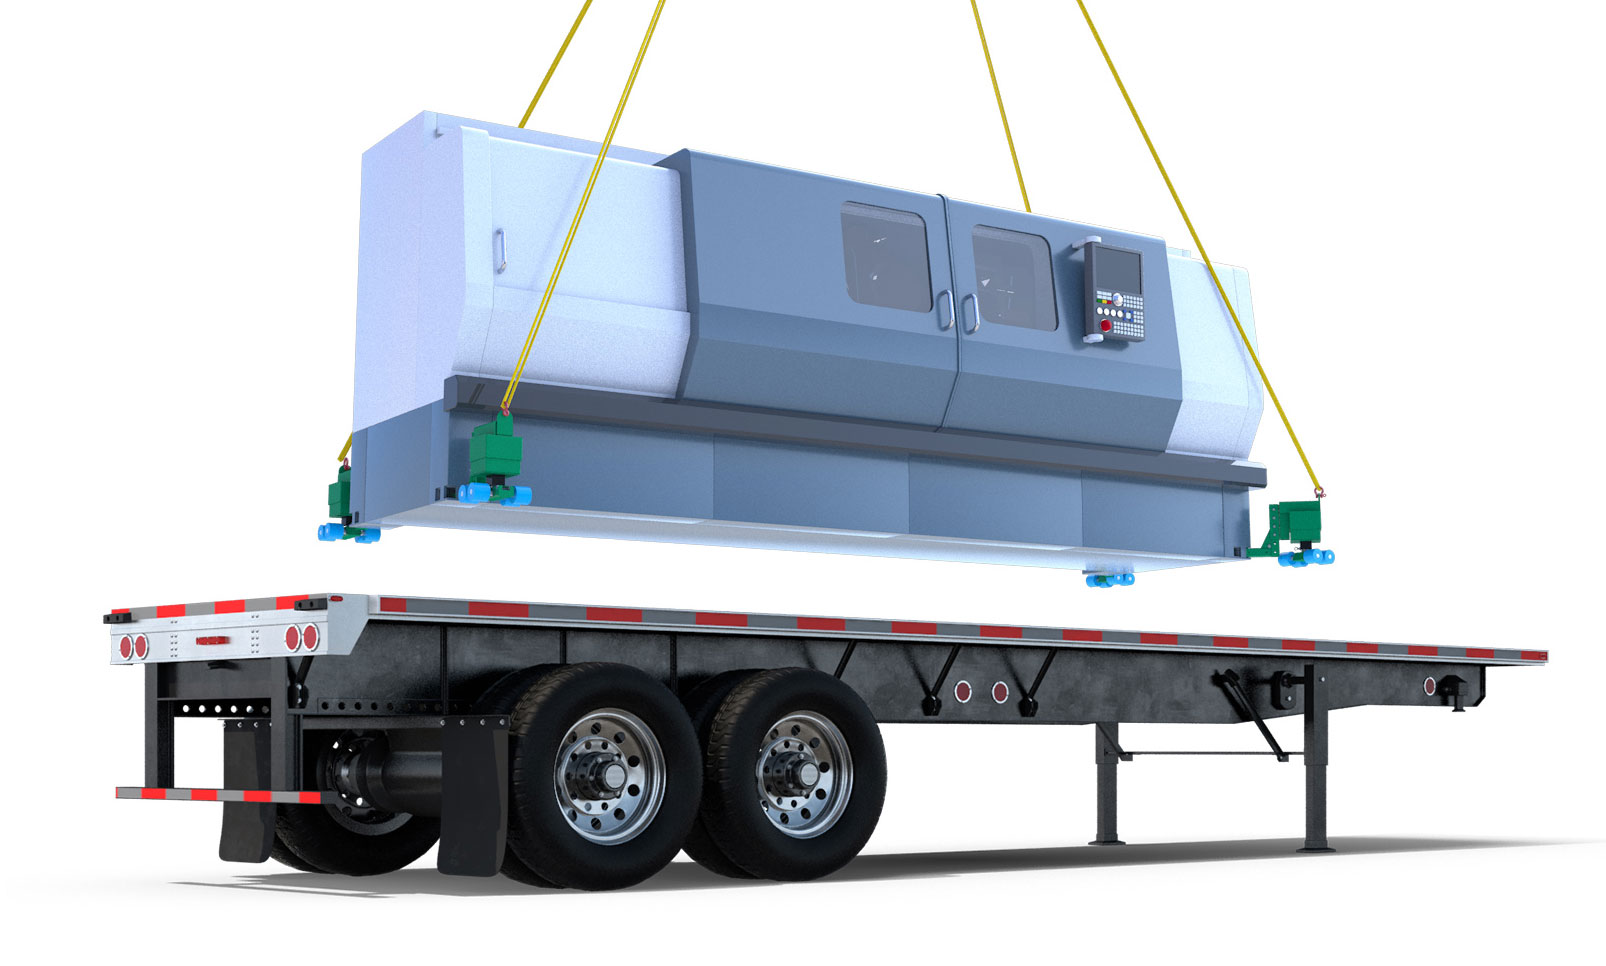 3D computer rendering of a CNC device being lifted from truck bed